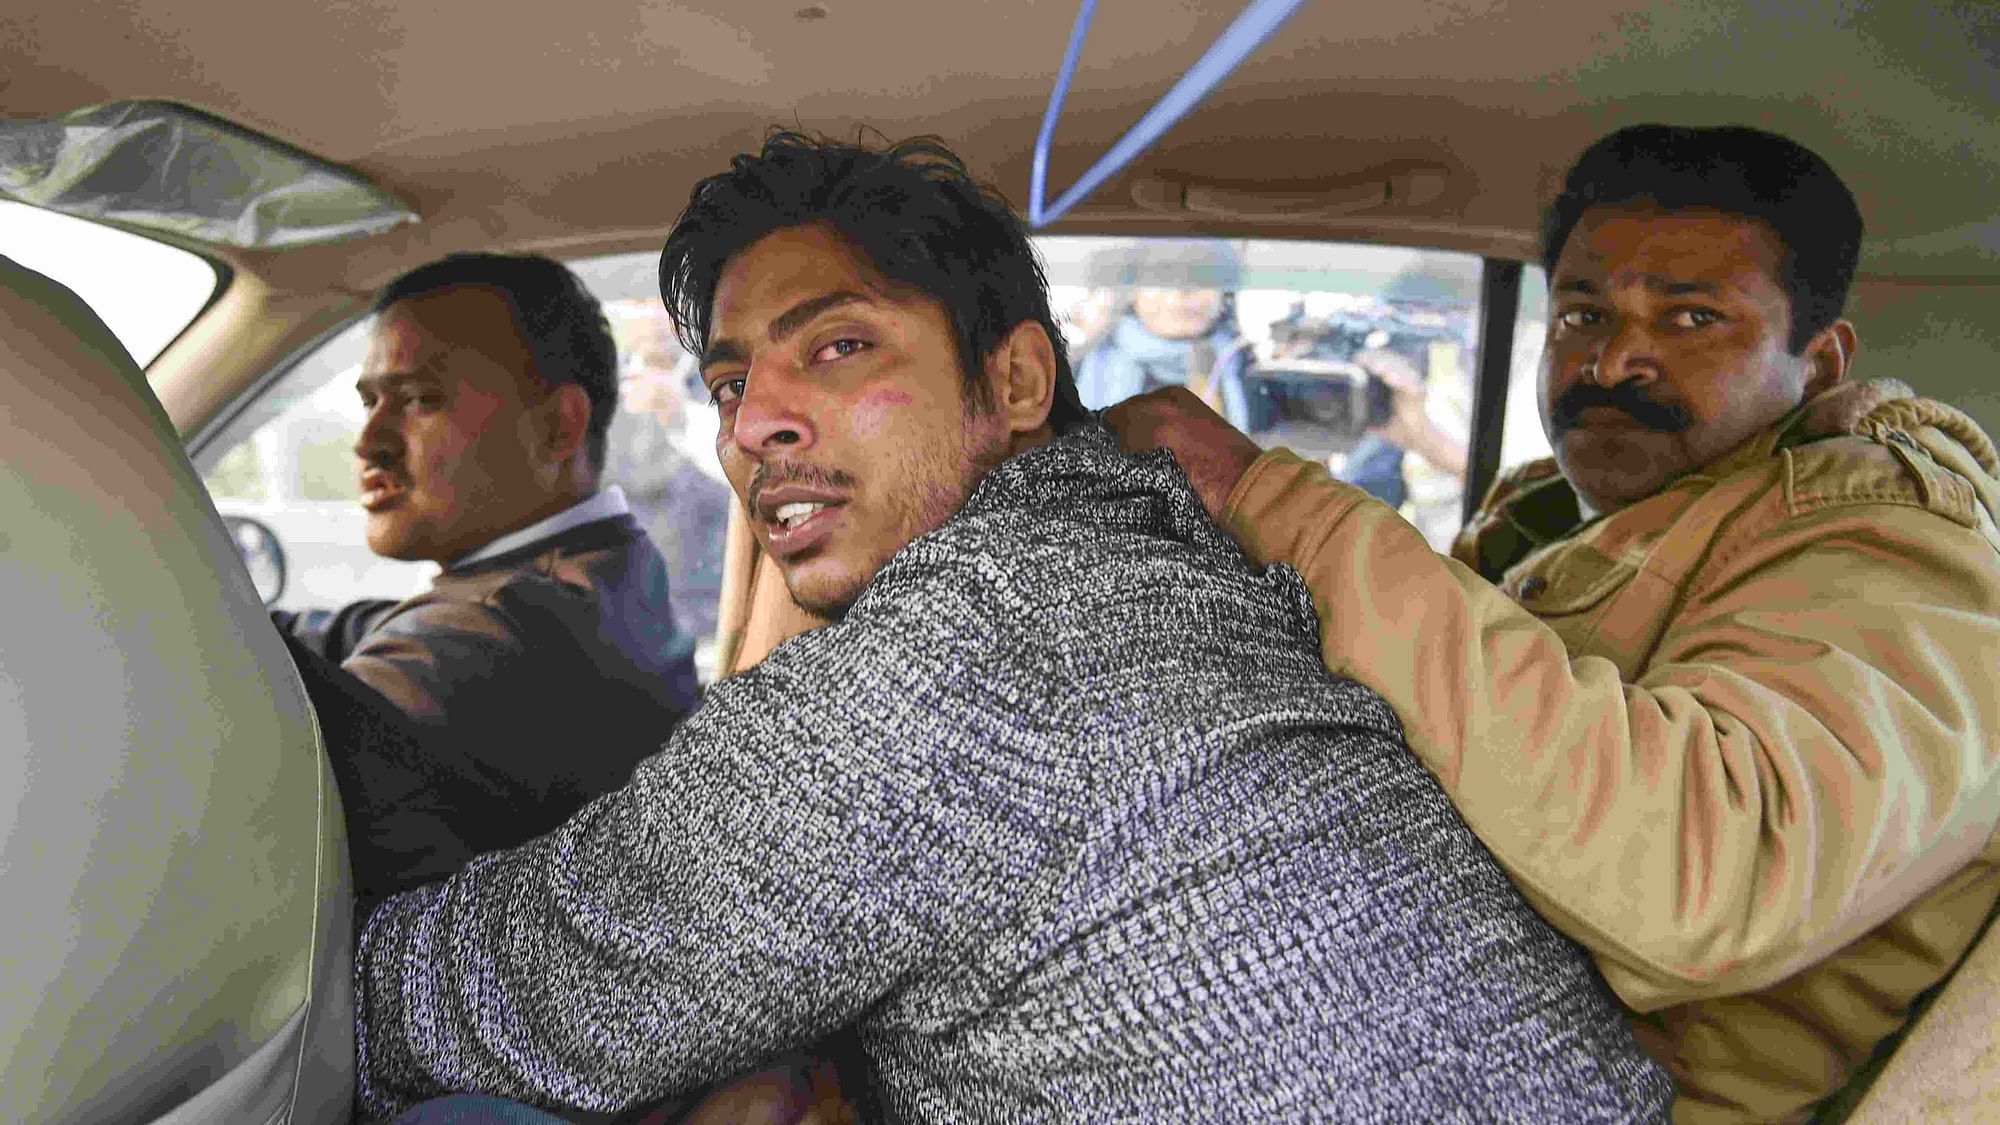 Police take away an unidentified person after he opened fire in the Shaheen Bagh area.